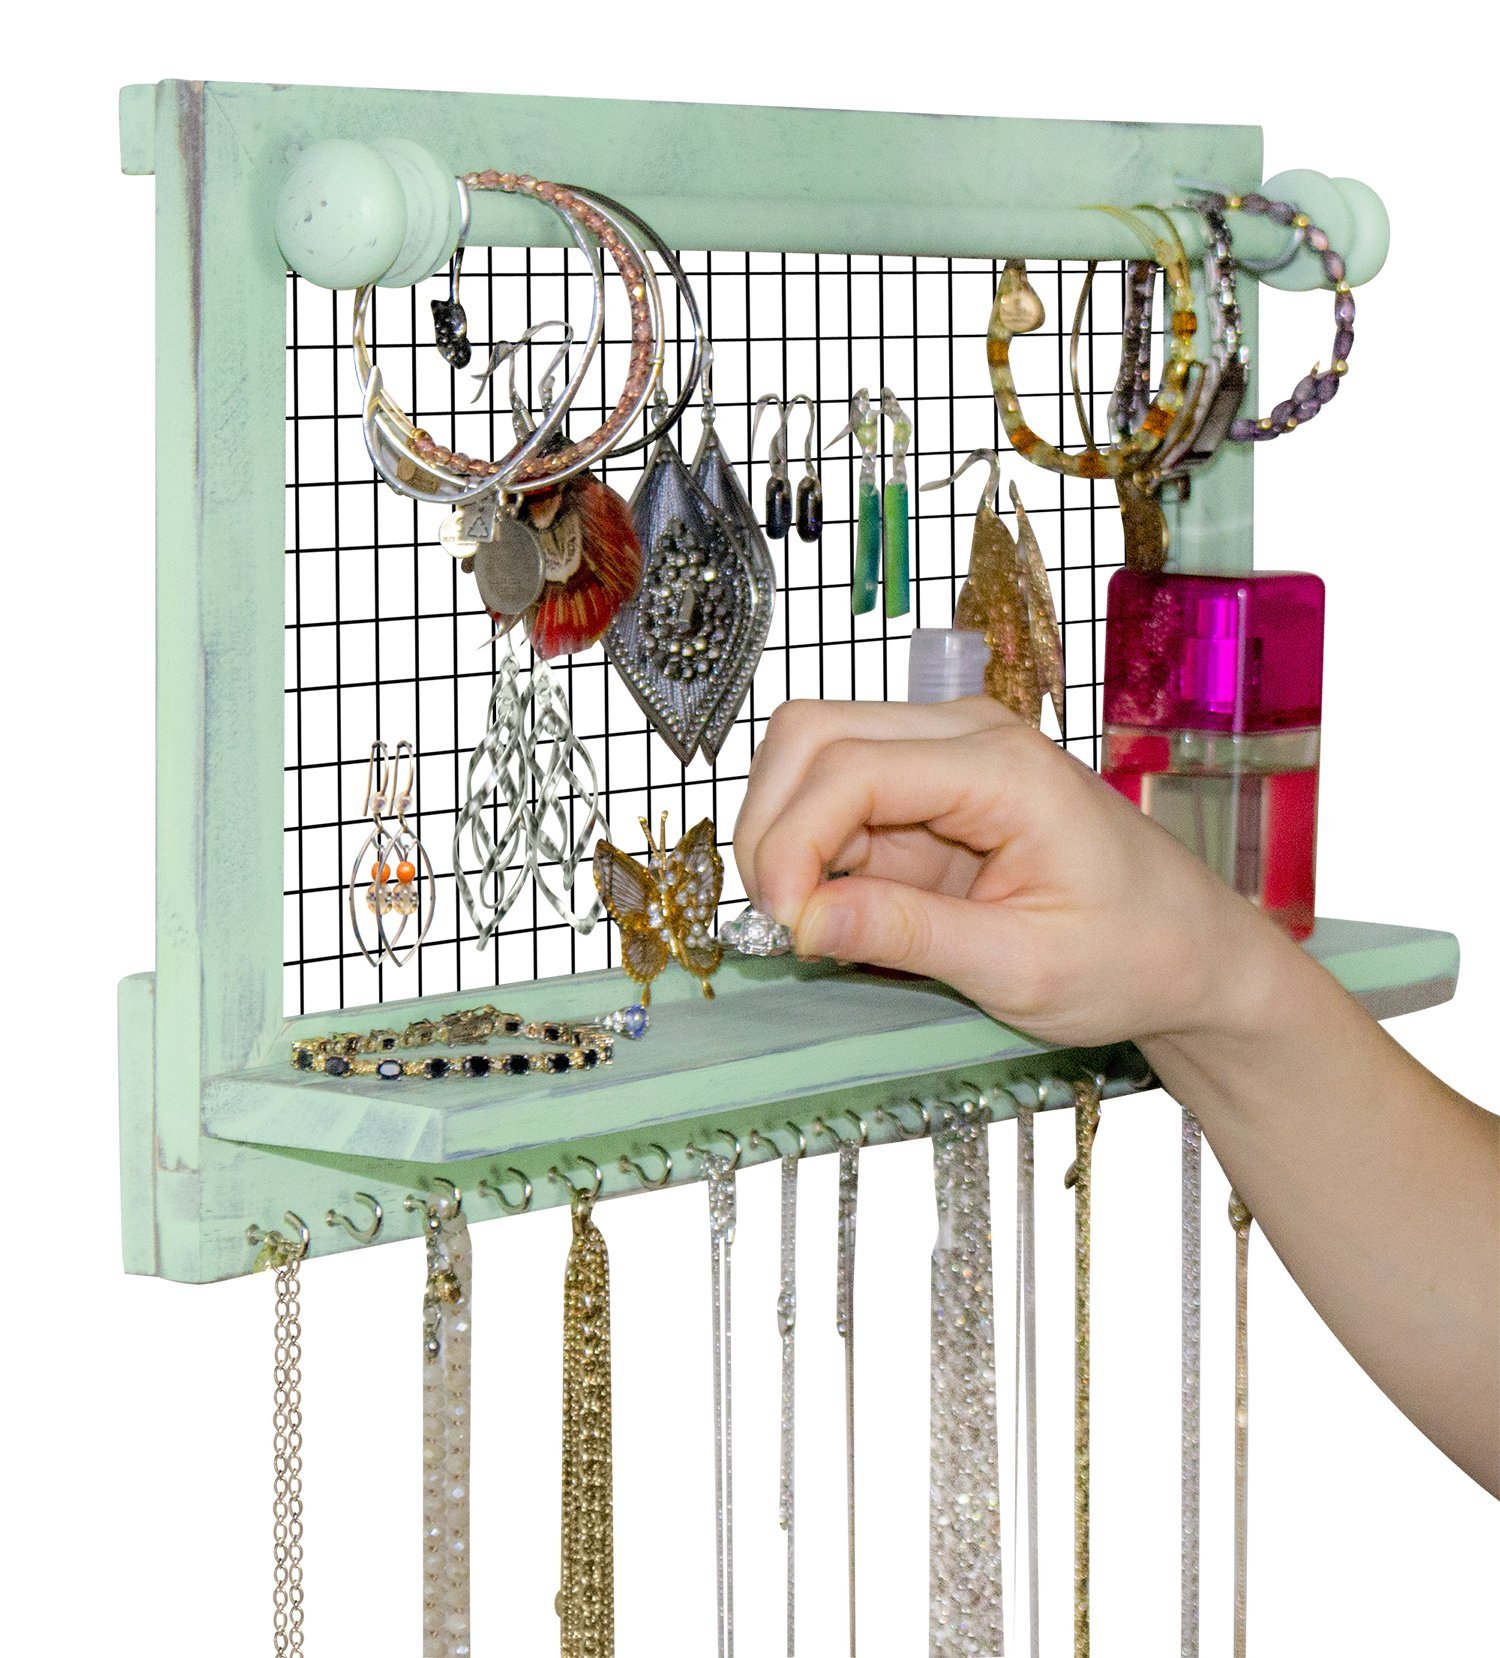 SoCal Buttercup Shabby Chic Jewelry Organizer with Removable Bracelet Rod from Wooden Wall Mounted Holder for Earrings Necklaces Bracelets and Other Accessories